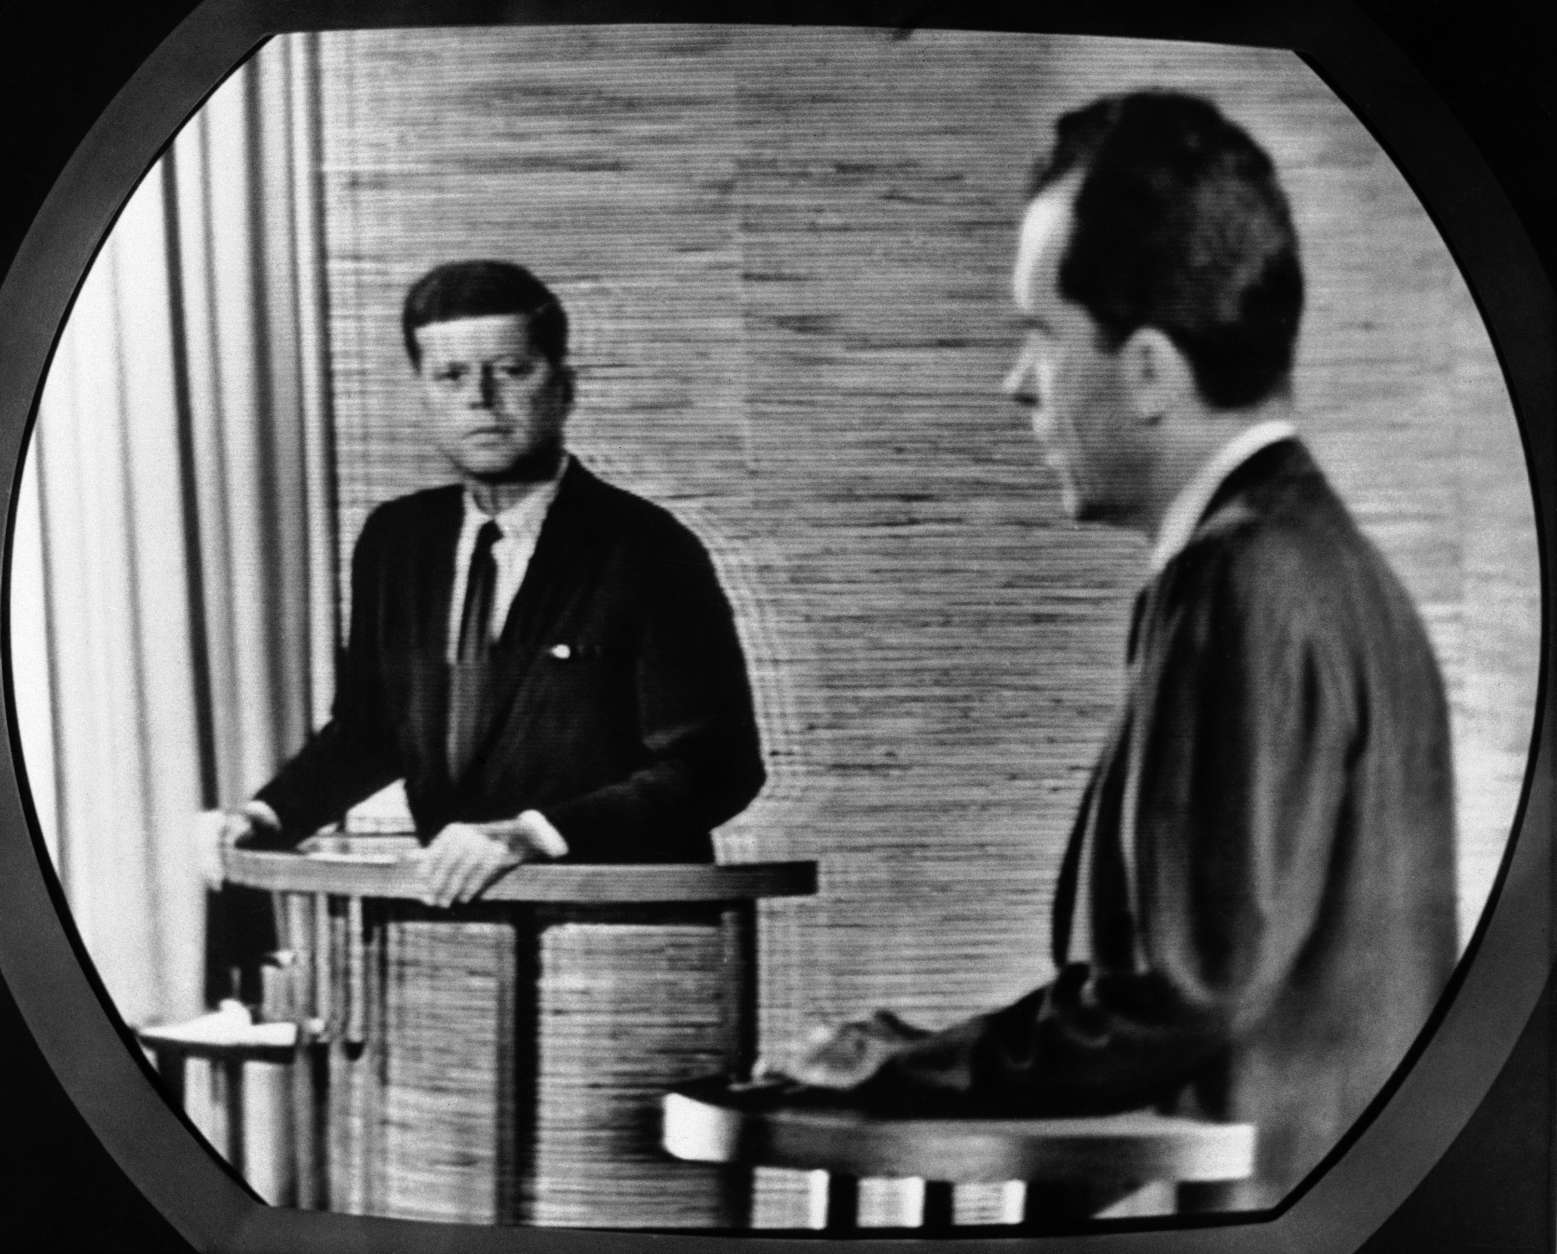 Vice President Richard Nixon, right, talks and Sen. John F. Kennedy listens in this view taken from television screen in New York, Oct. 7, 1960. The debate between the presidential candidates was broadcast nationally on TV and radio from Washington studio. (AP Photo)